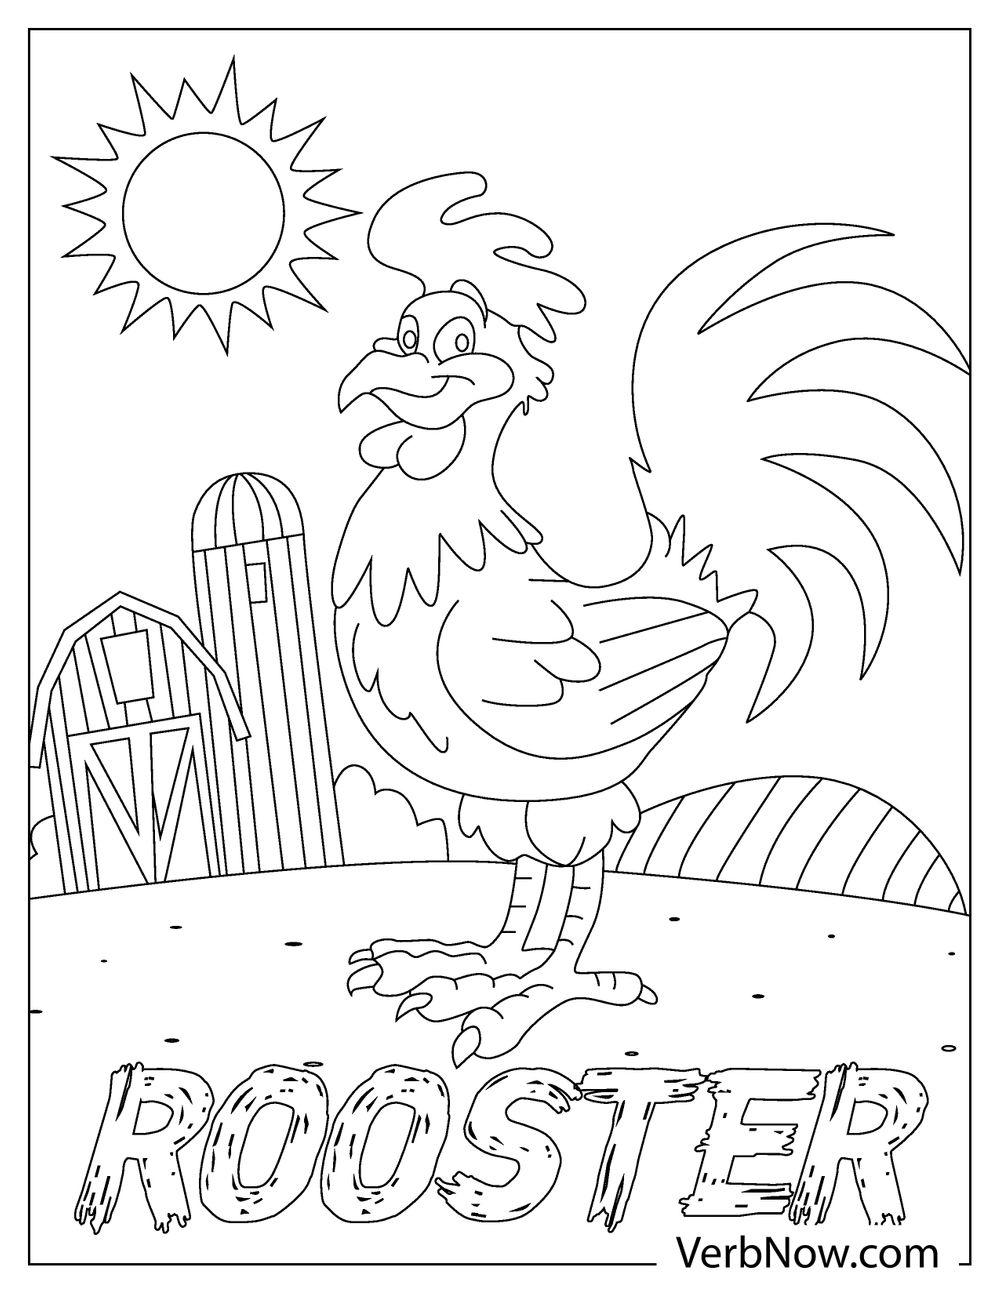 Free ROOSTER Coloring Pages & Book for Download (Printable PDF) - VerbNow